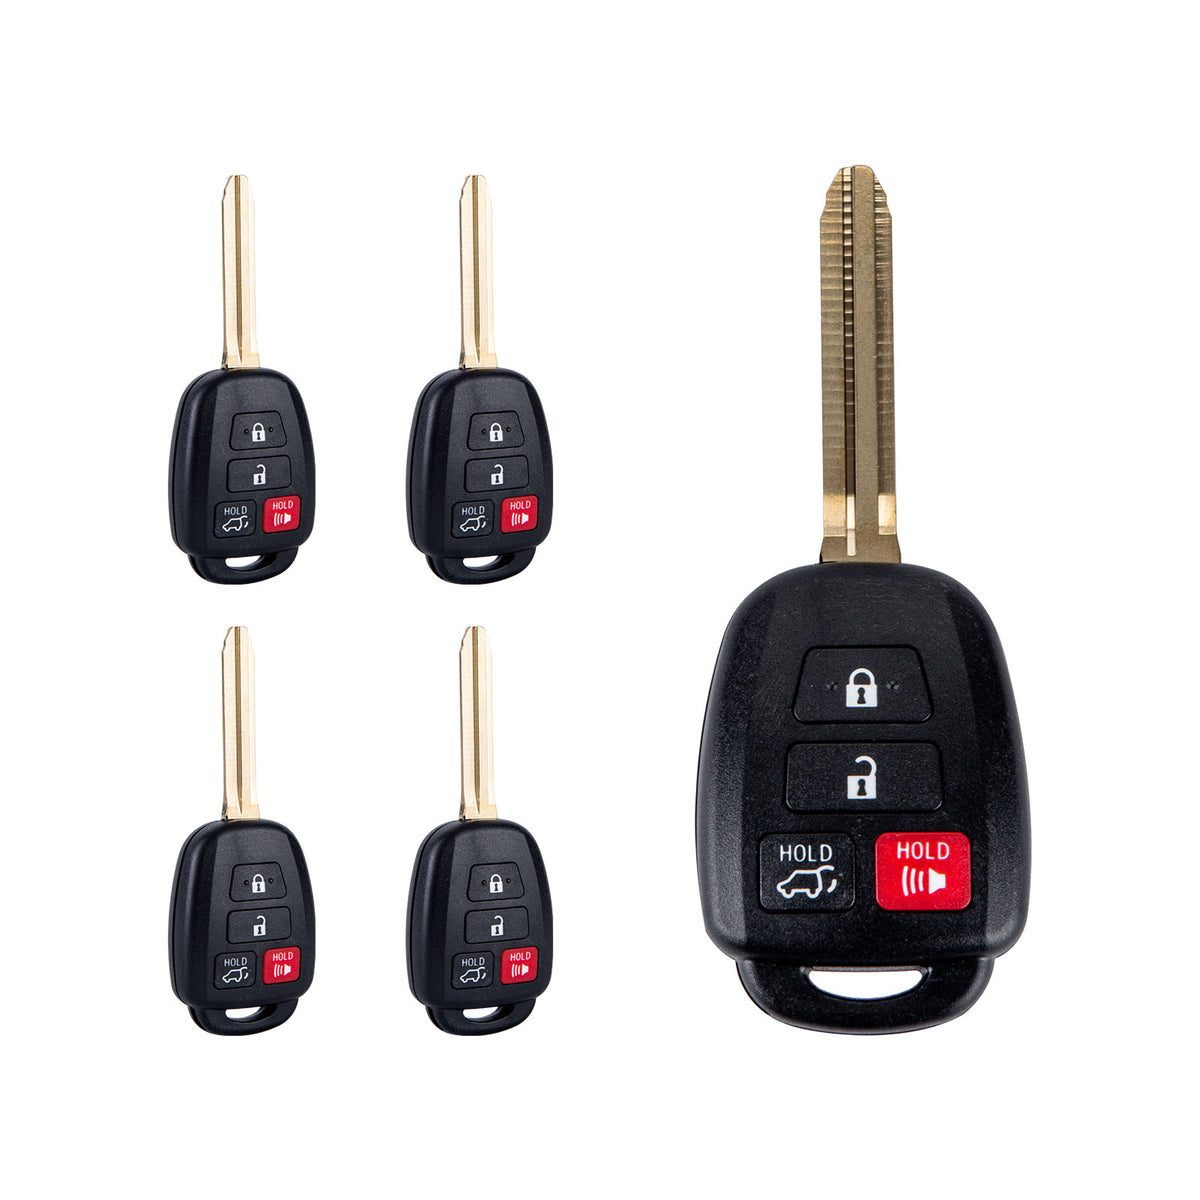 Lots of 5 Remote Car Key Fob Replacement for Toyota GQ4-52T fits 2014 2015 2016 2017 2018 2019 Highlander H Chip